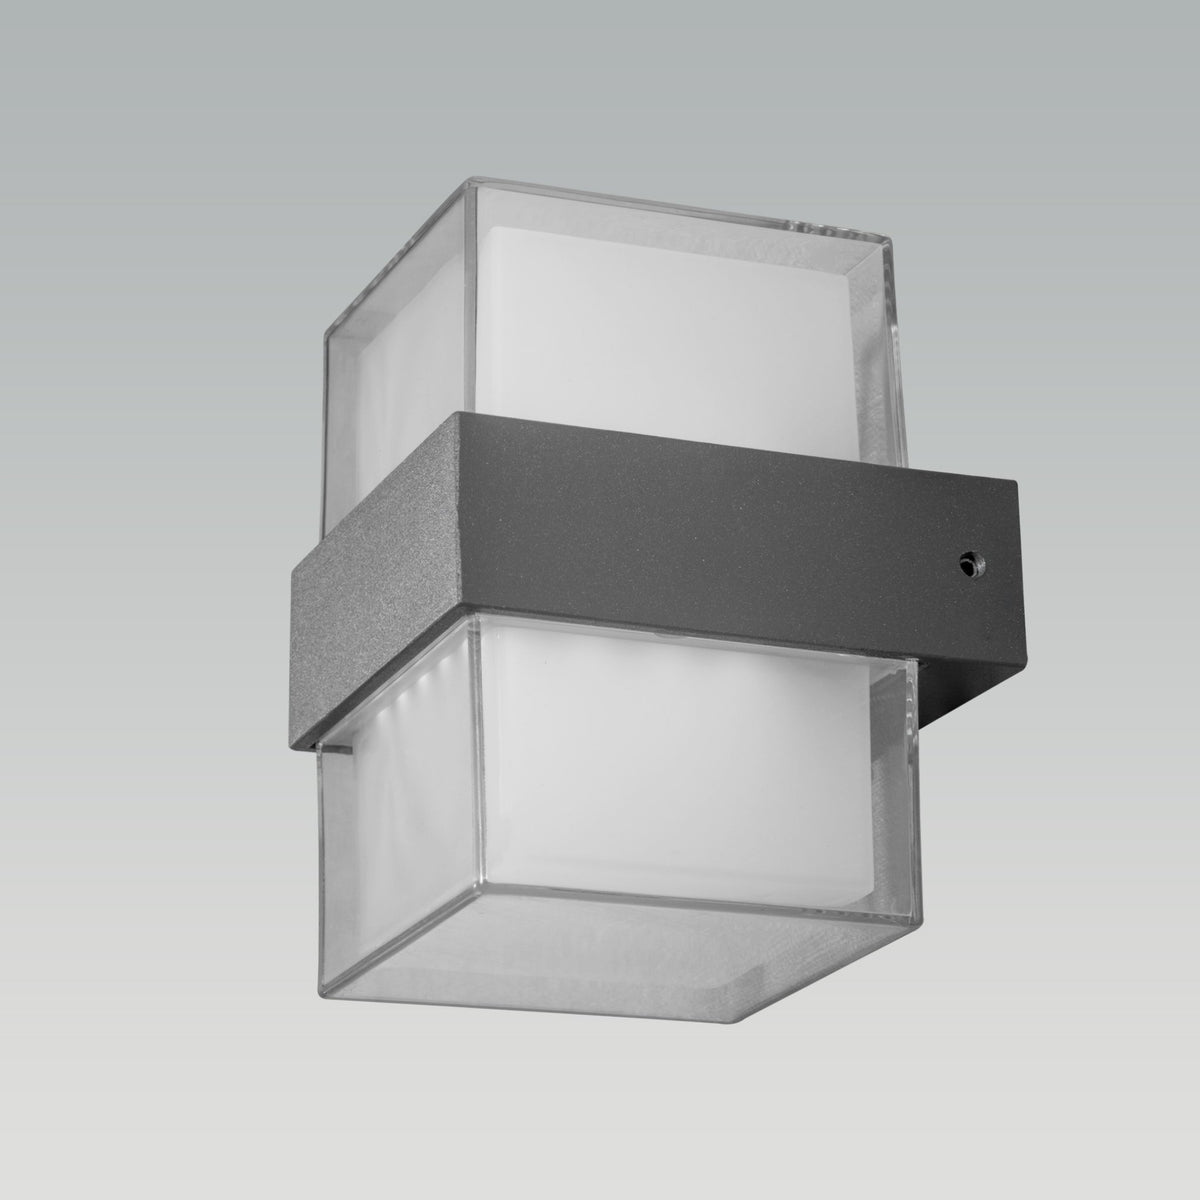 Shop Vision Square LED Outdoor Wall Light online